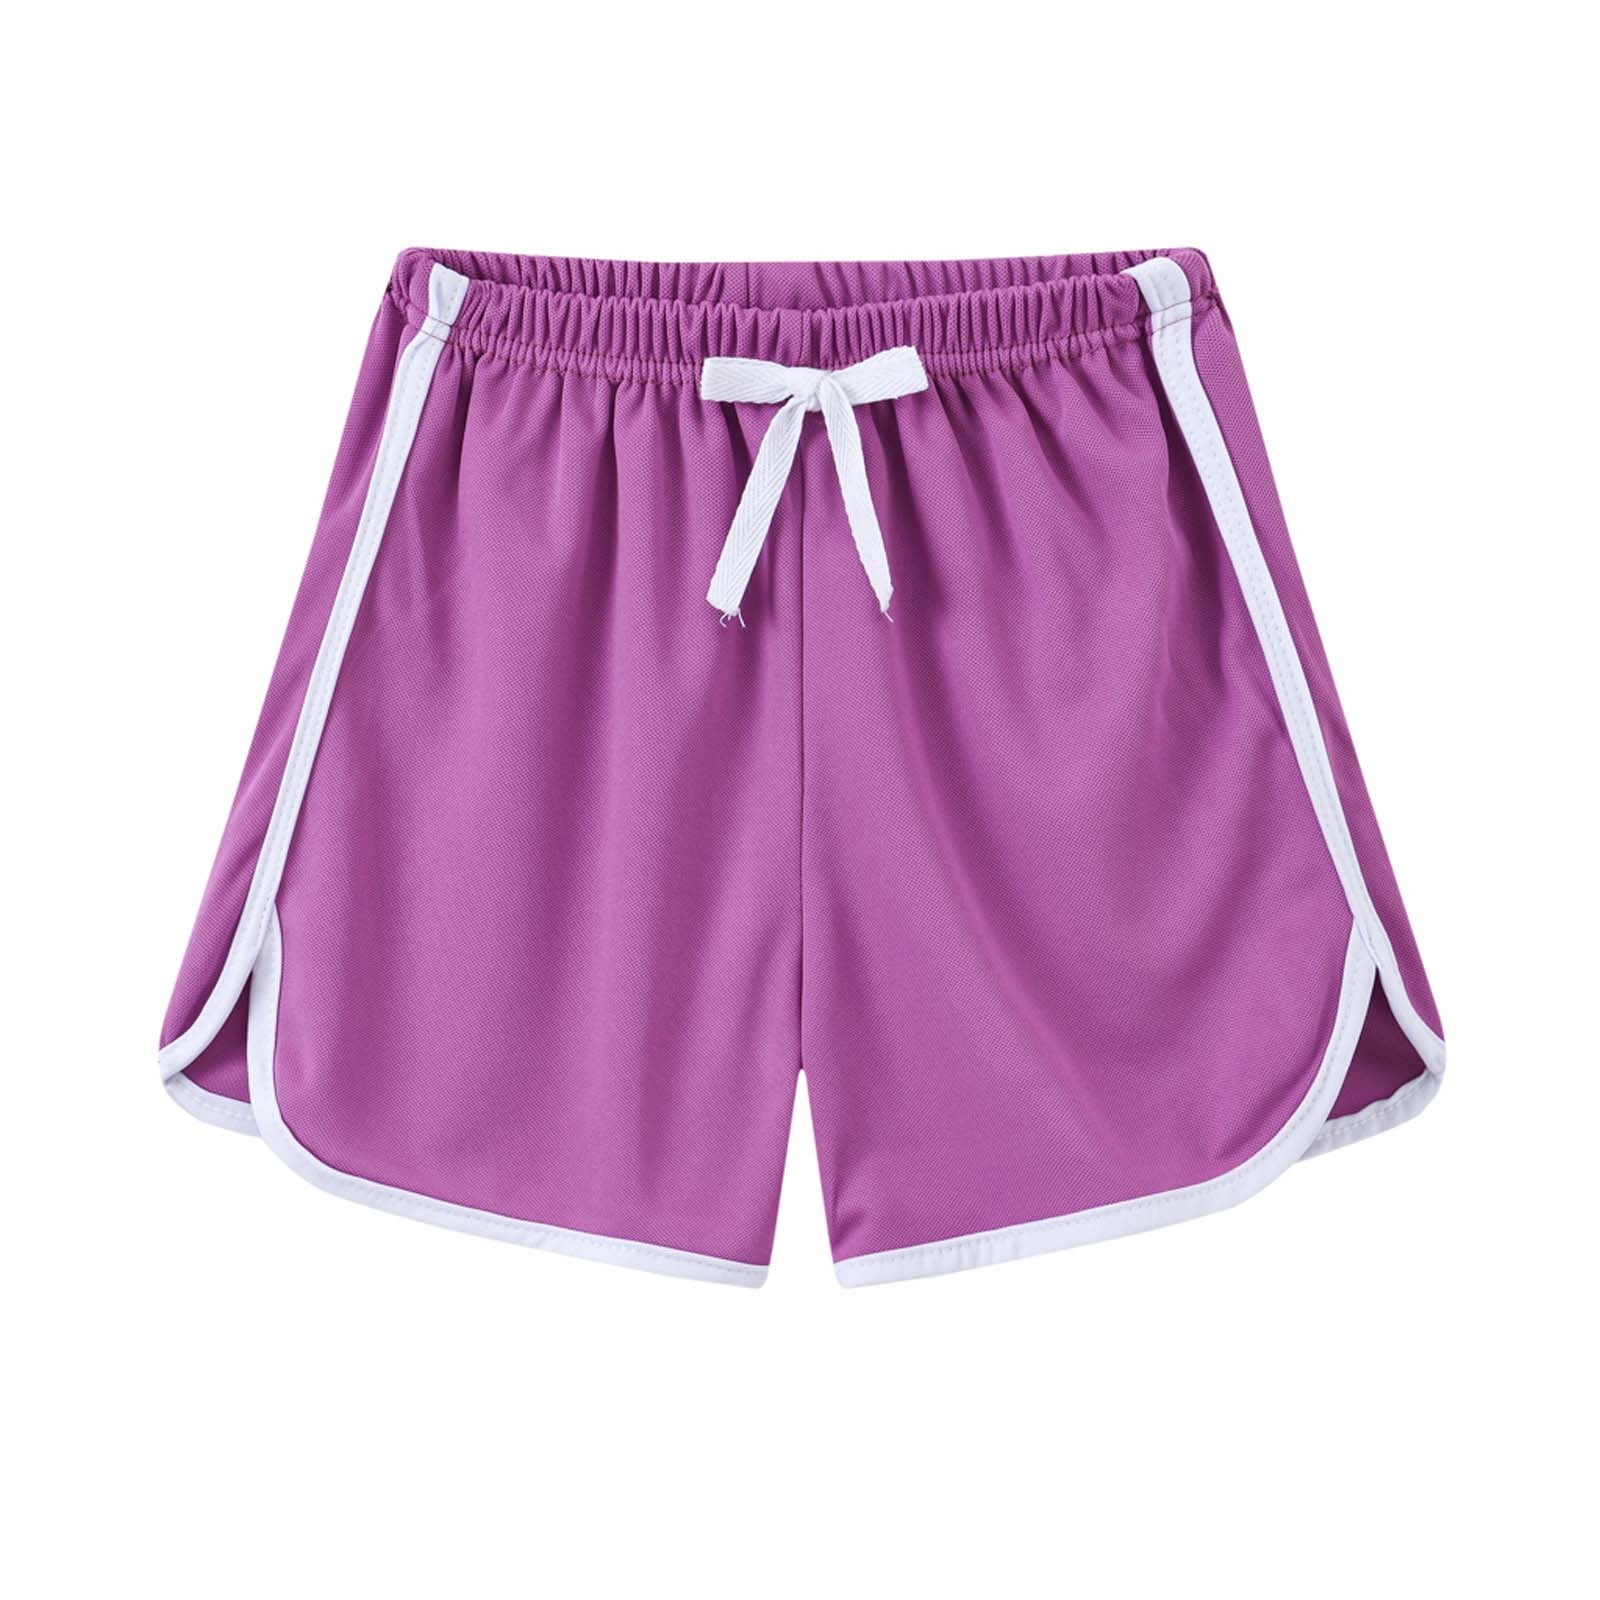 WREESH Kids Boys Girls Summer Sport Shorts Workout Shorts Children Rubber  Waist Beach Pants Casual Solid Color Shorts Baby Clothes Purple 